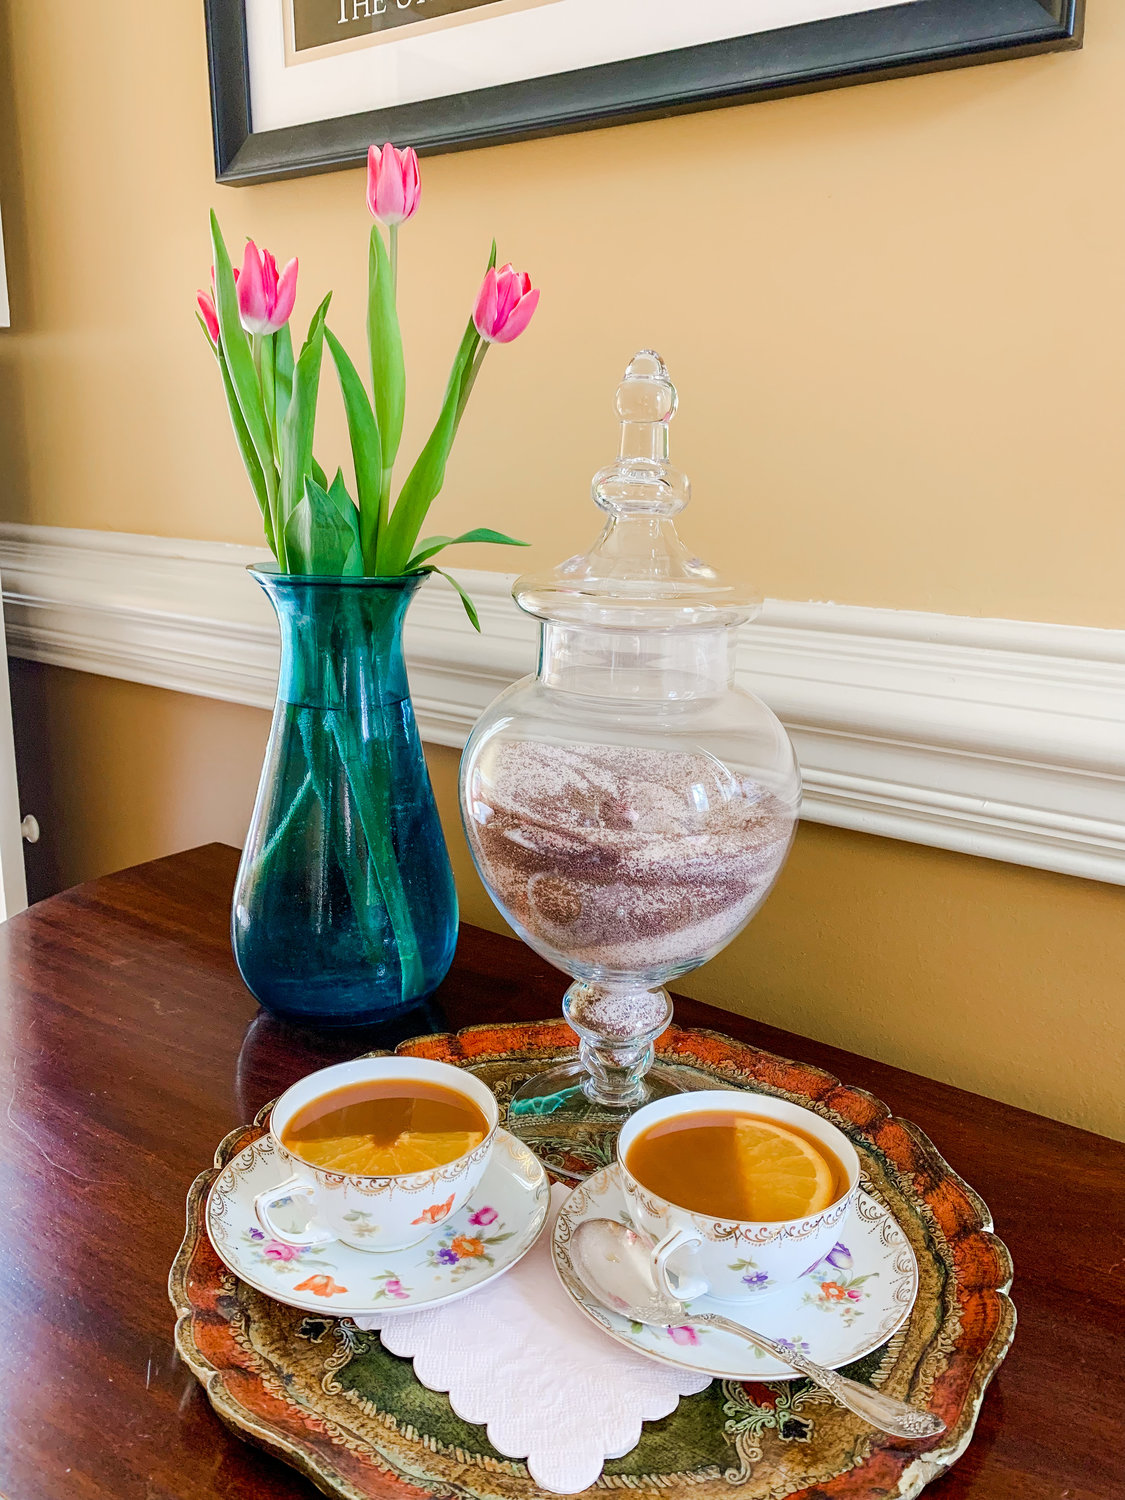 Russian Tea is a sweet combination of tea and citrus flavors.